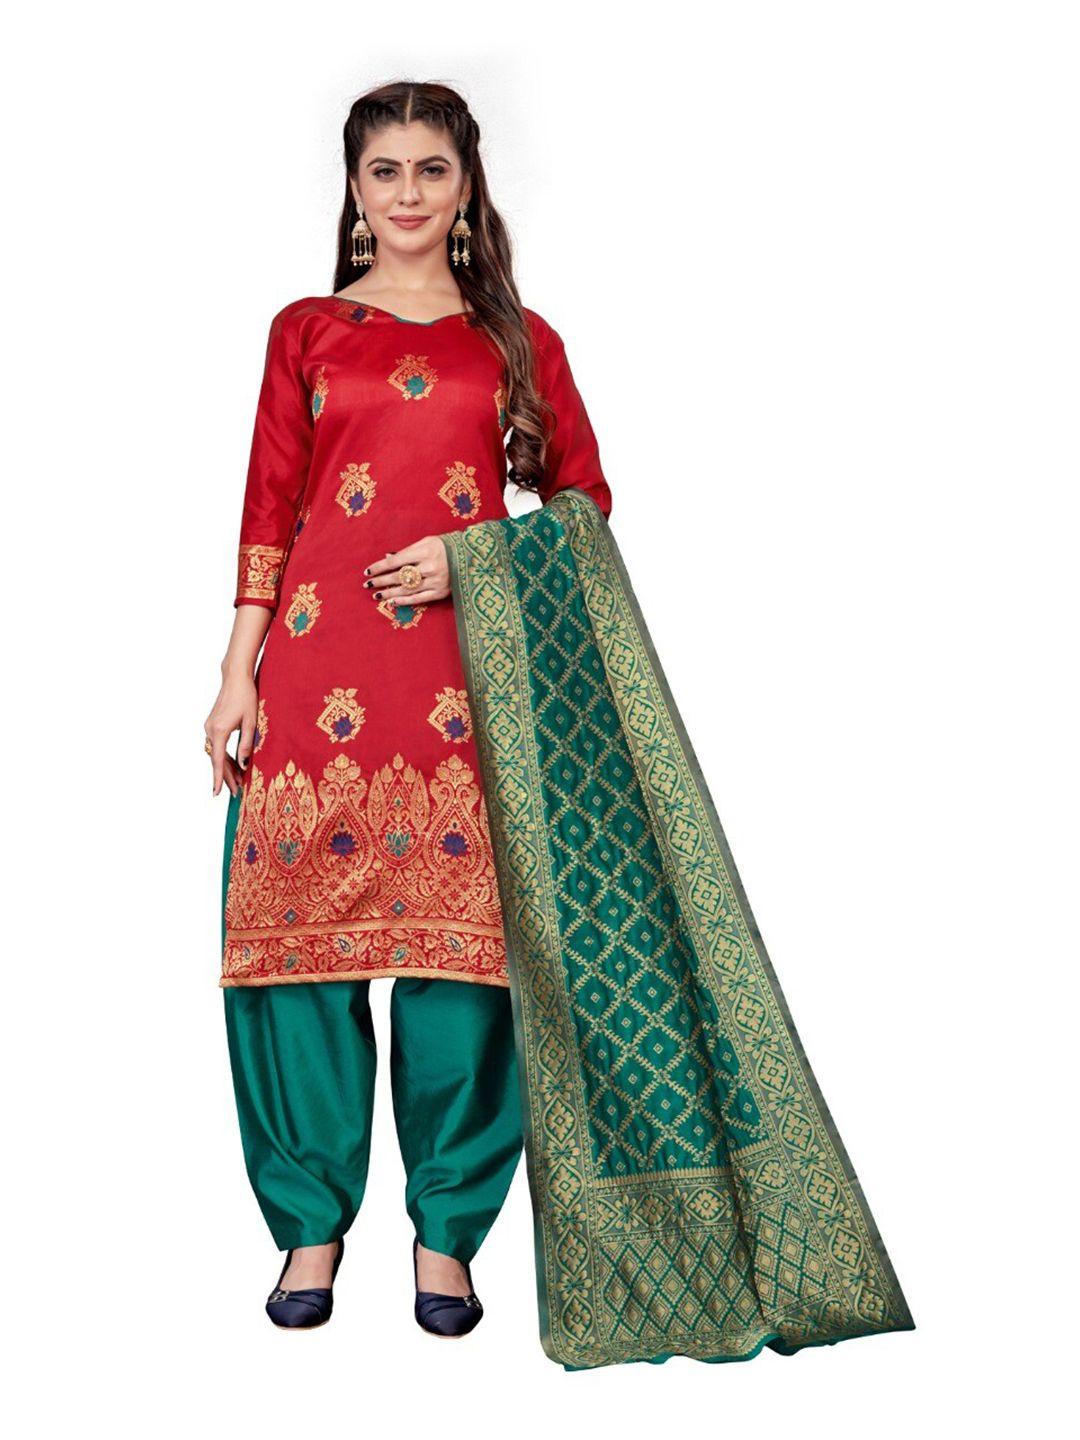 morly women red & green dupion silk unstitched dress material